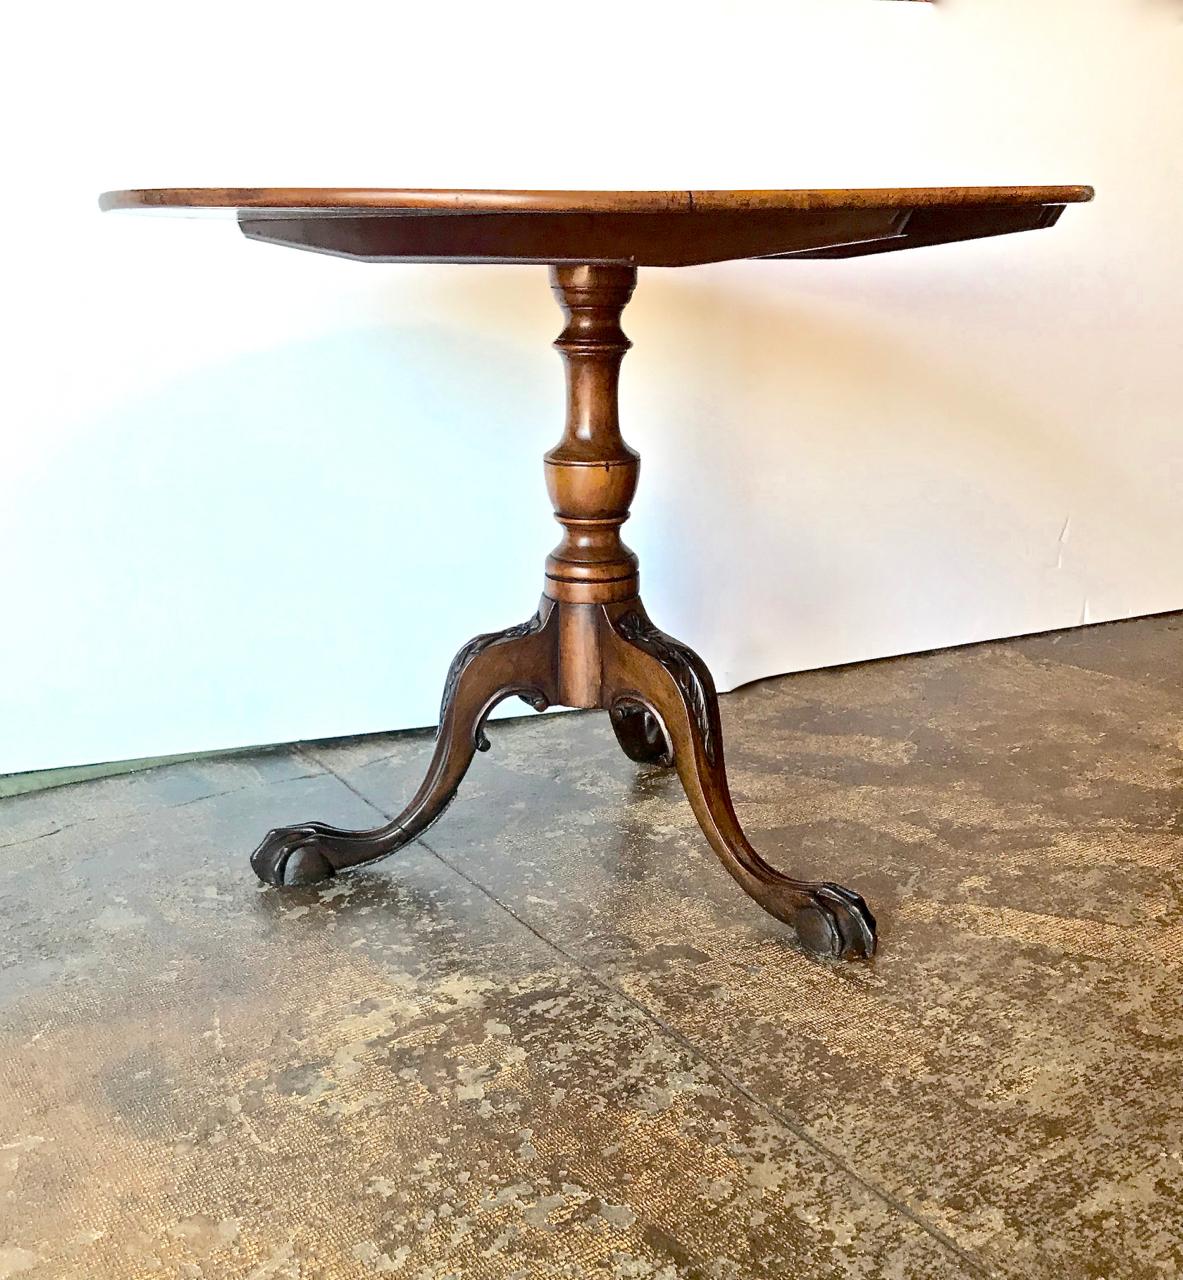 This is a beautiful example of a mid-18th century American tilt-top tea table that was most probably created in Salem, Massachusetts. The table appears to retain its original surface. (If not the original surface, than a very old 18th or early 19th